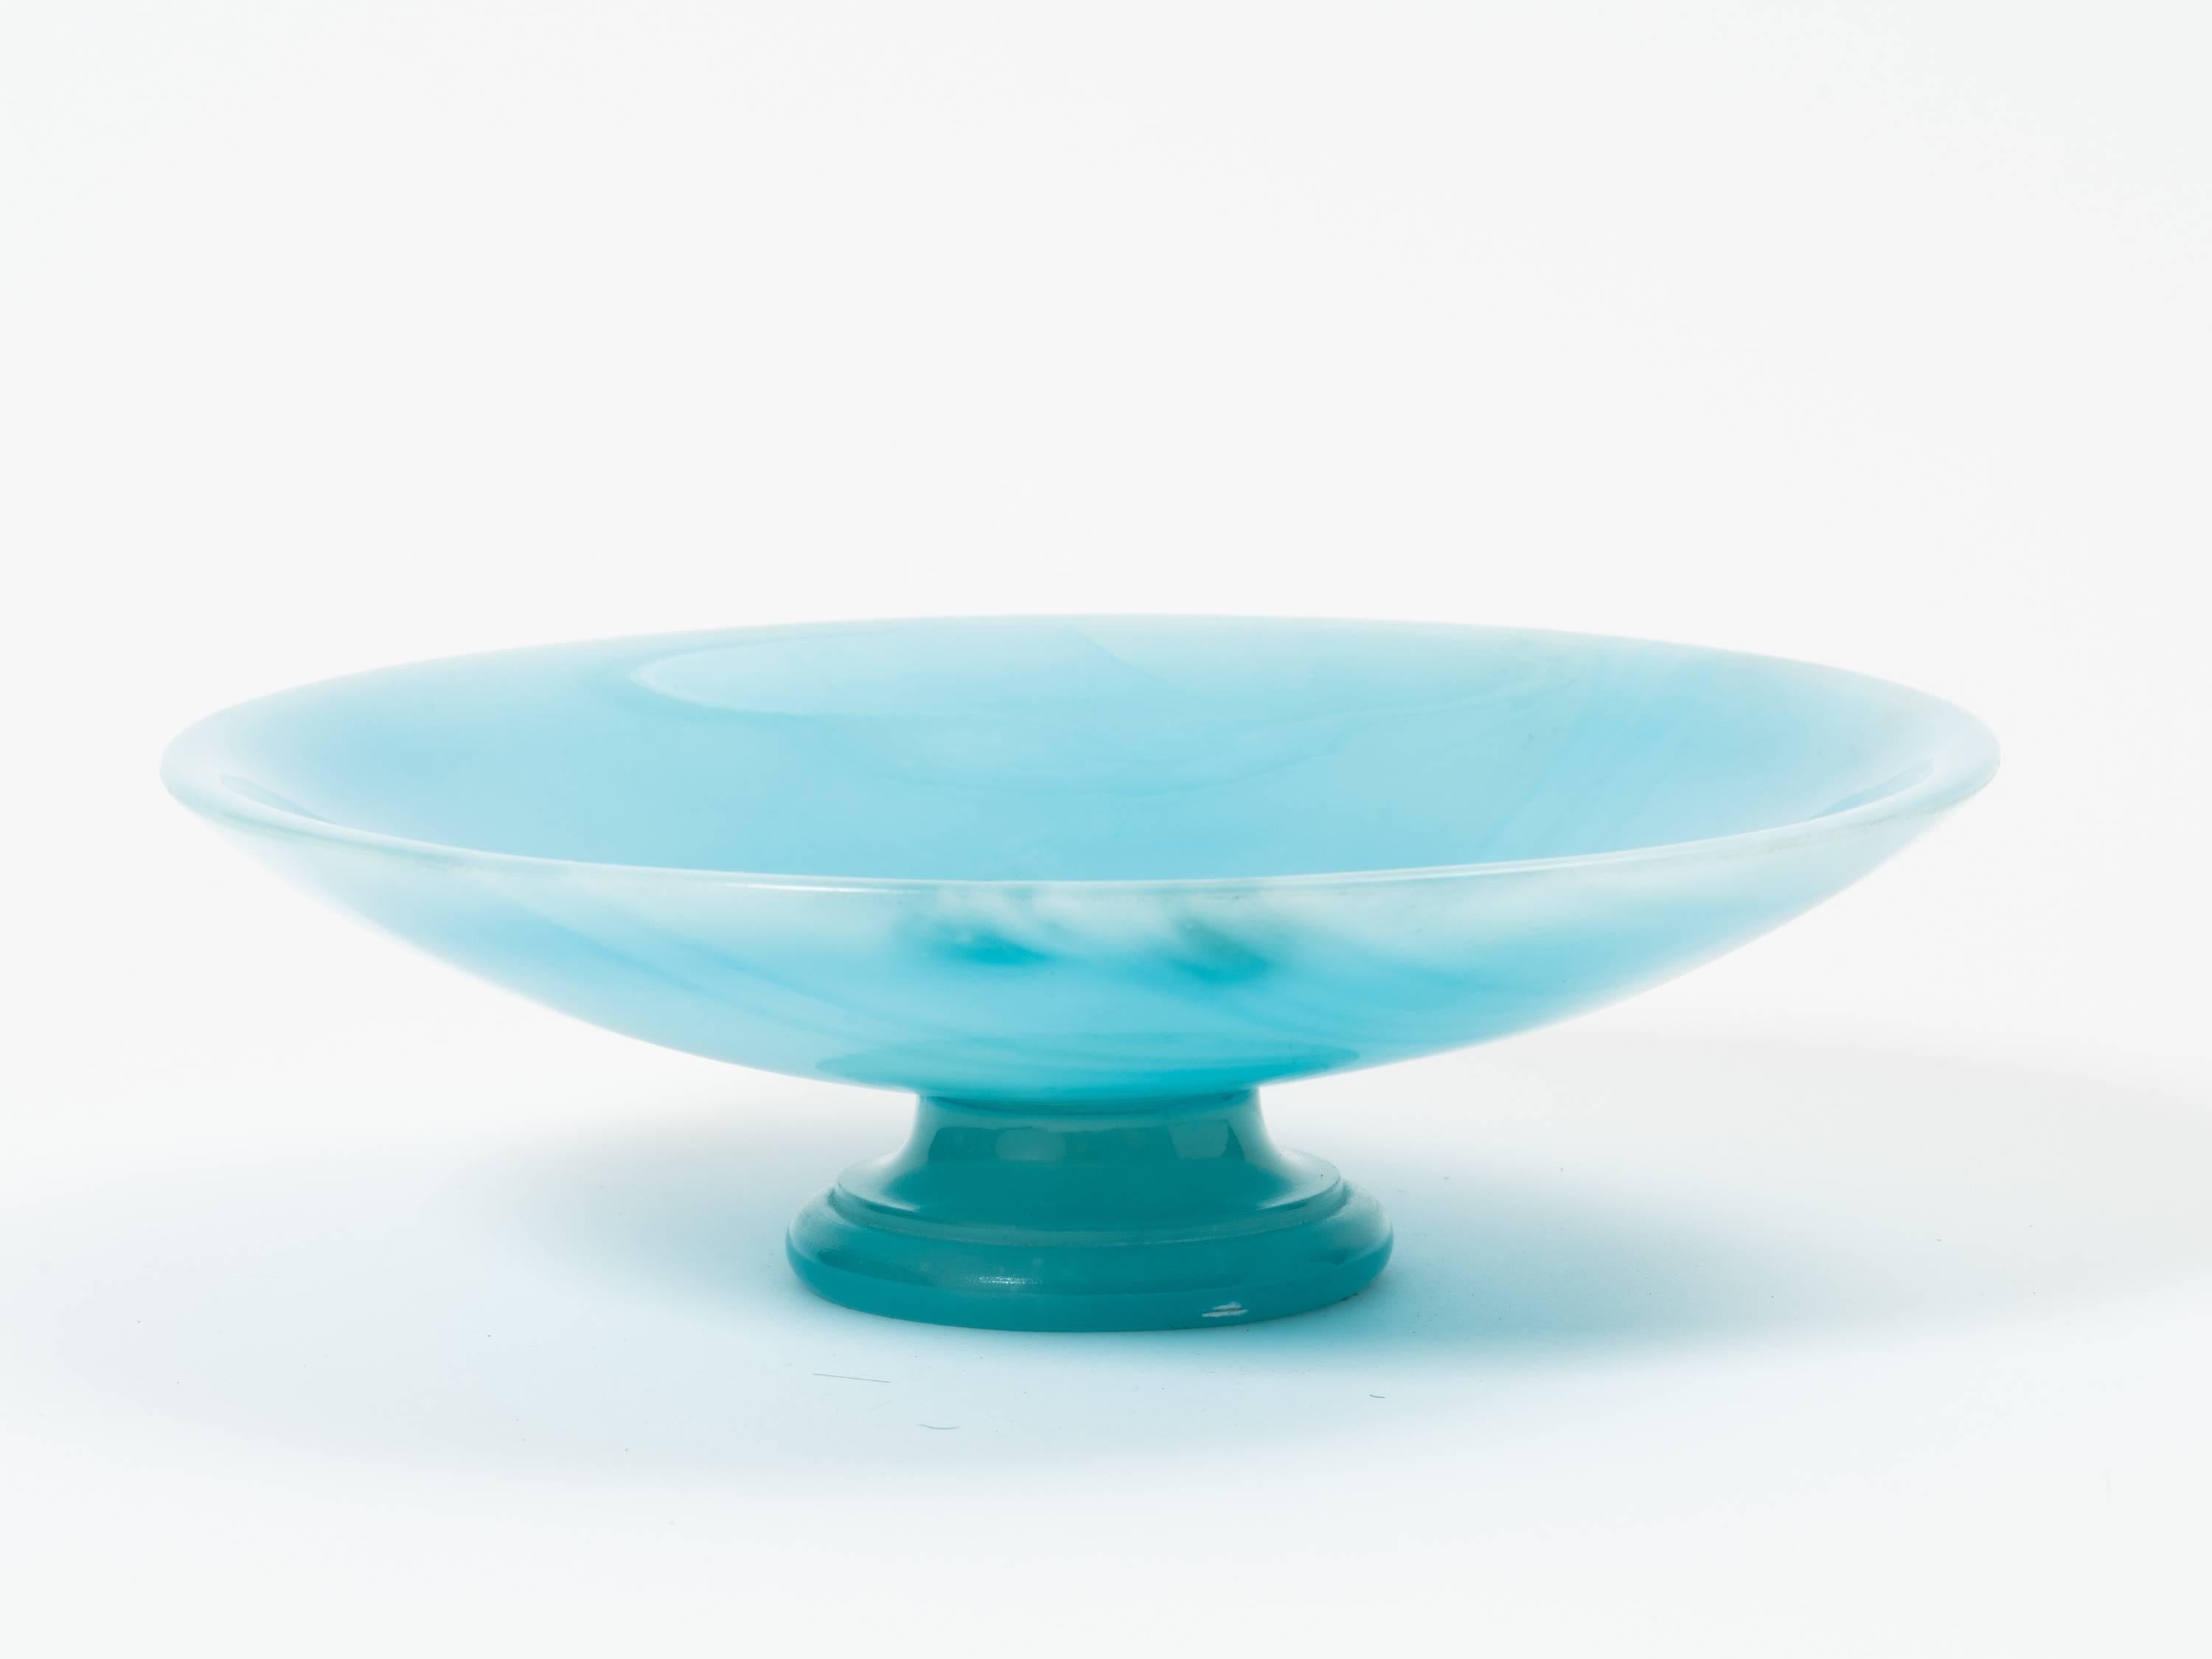 Luminescent aquamarine alabaster centerpiece tazza with pedestal. Tazza is new, unused vintage hand-carved and dyed alabaster, Italy, circa 1960s. Original foil labels present.